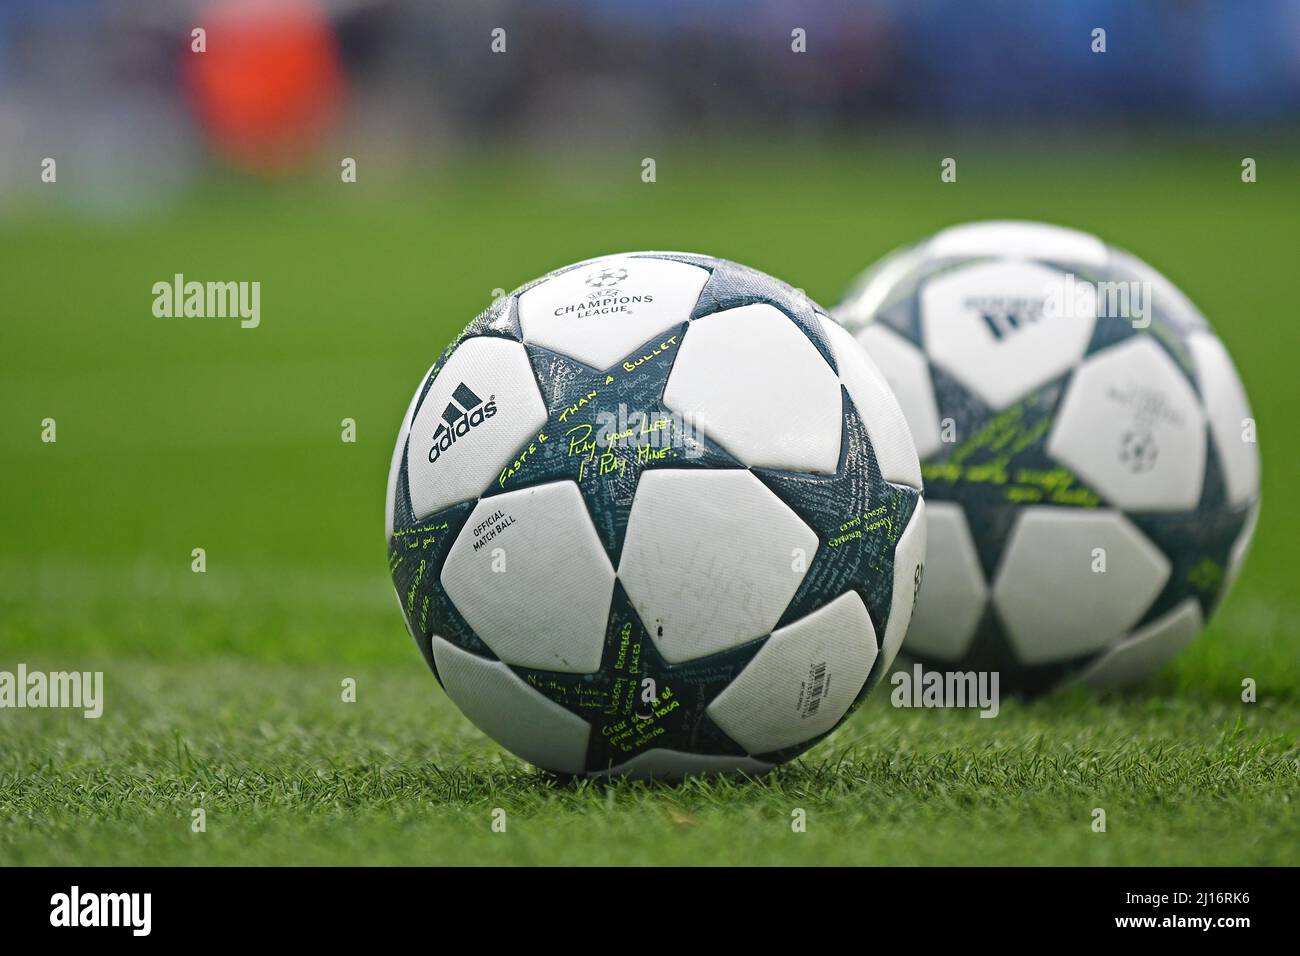 MANCHESTER, ENGLAND - AUGUST 24, 2016: The official UEFA Champions League  ball pictured prior to the second leg of the 2016/17 UEFA Champions League  tie between Manchester City (Engalnd) and FCSB (Romania)